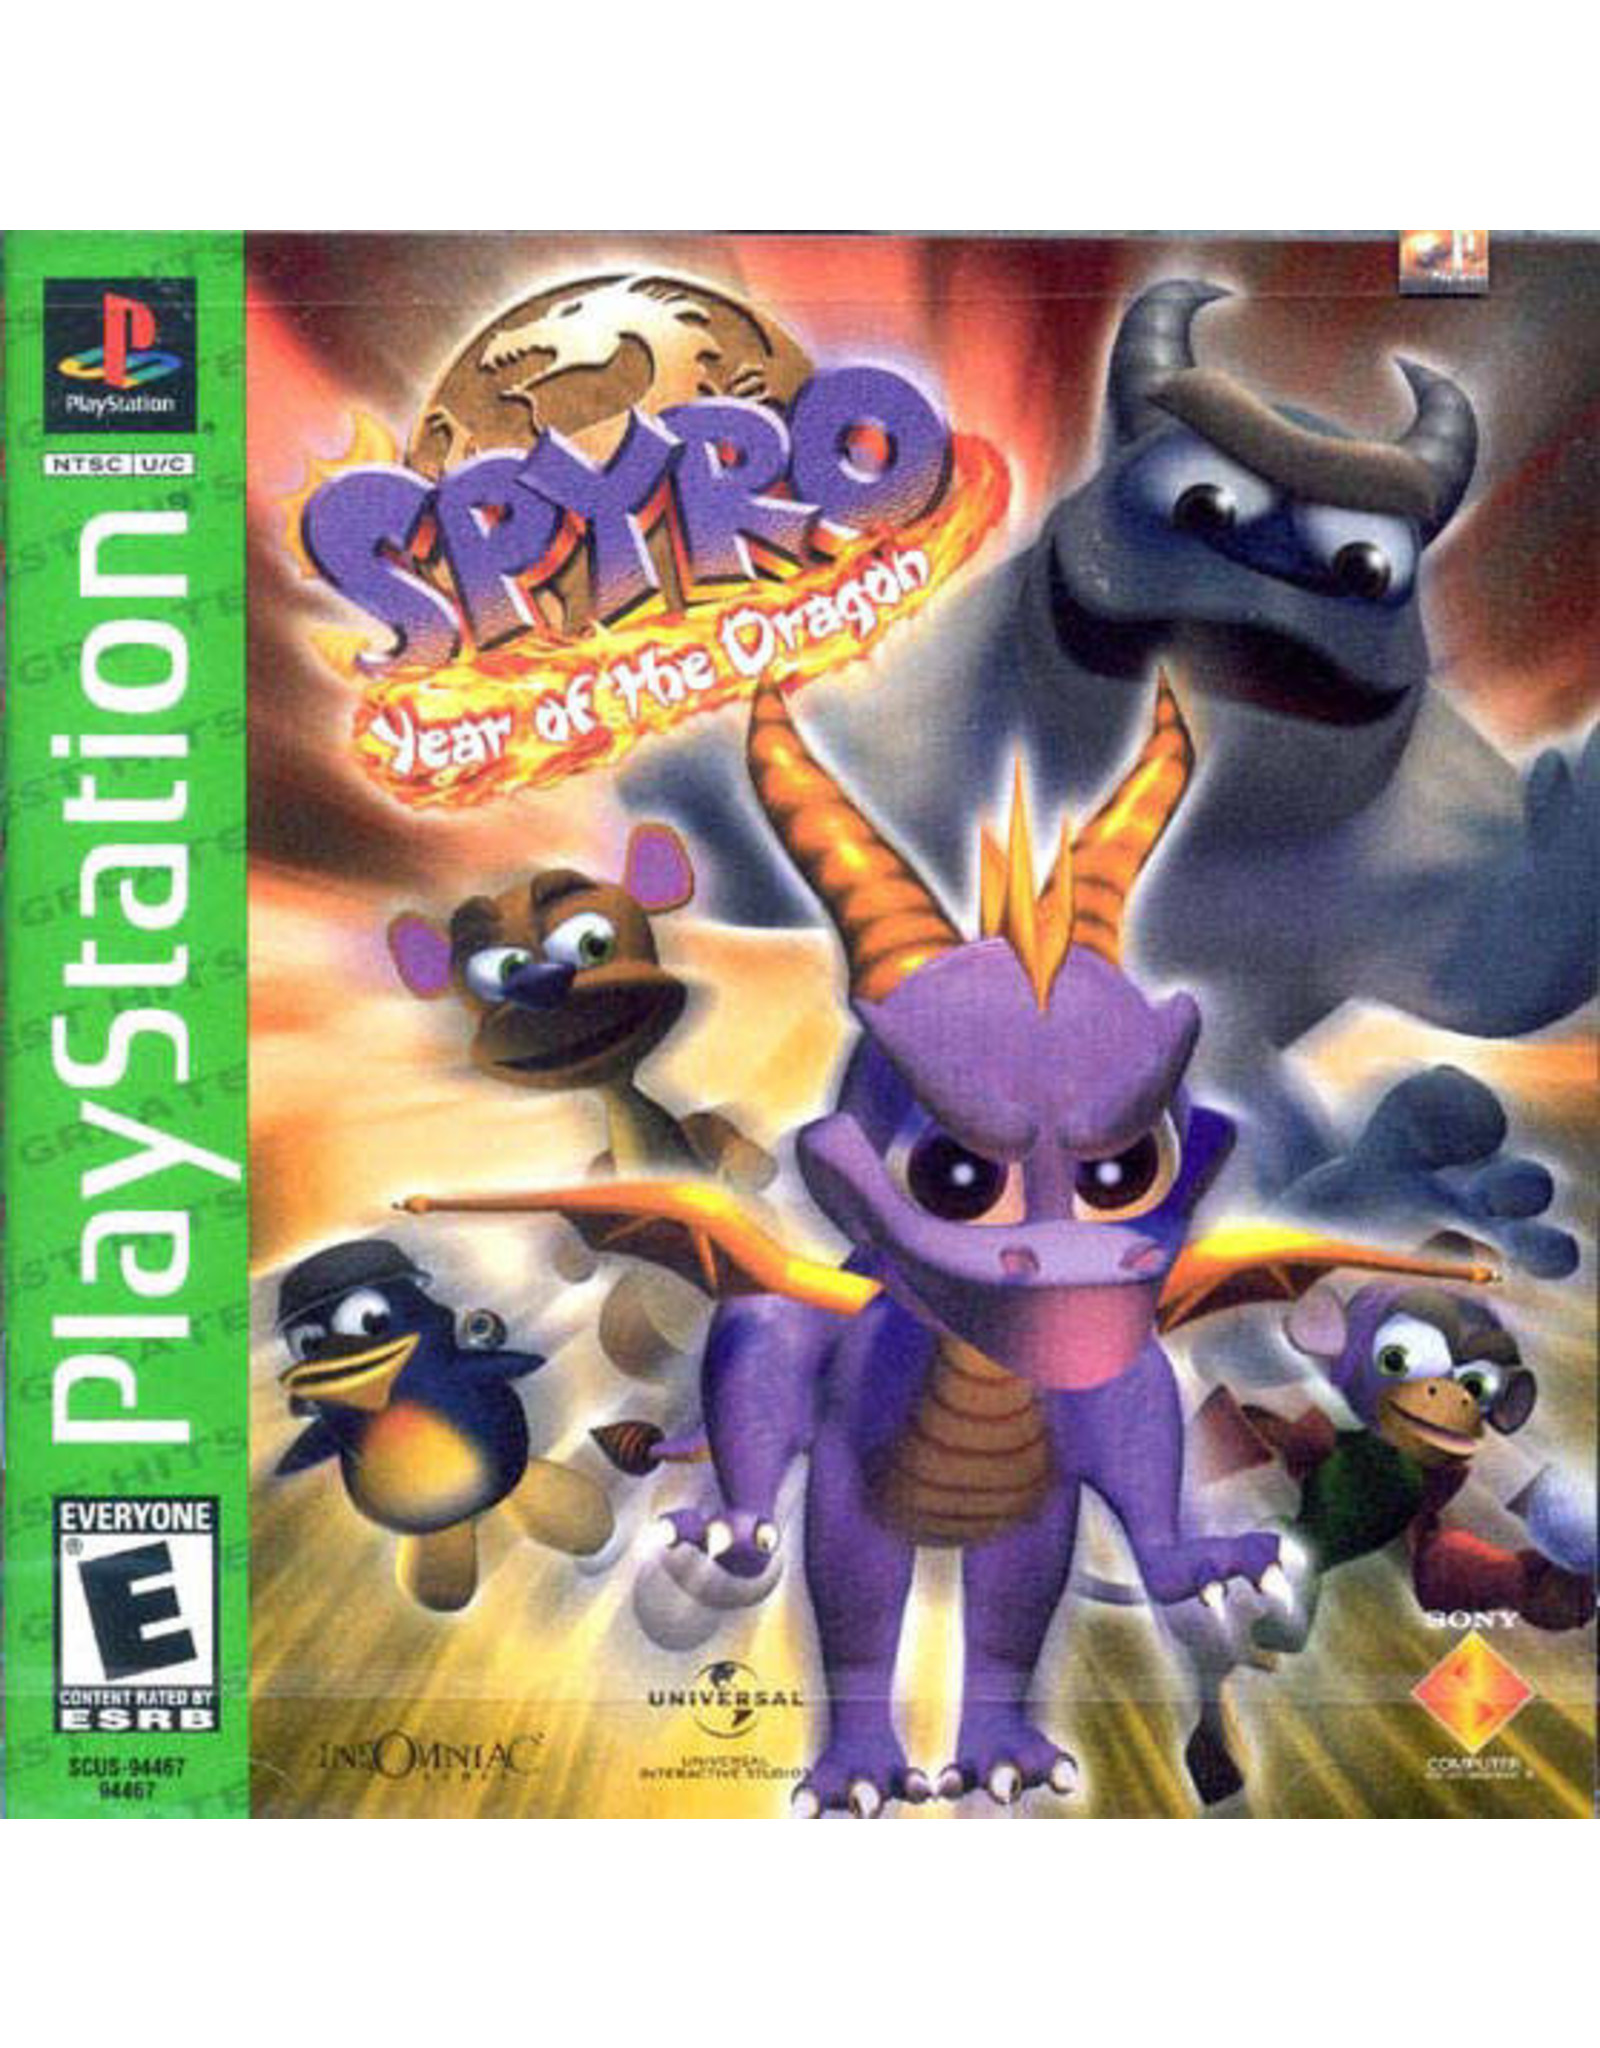 Playstation Spyro Year of the Dragon - Greatest Hits (Used)